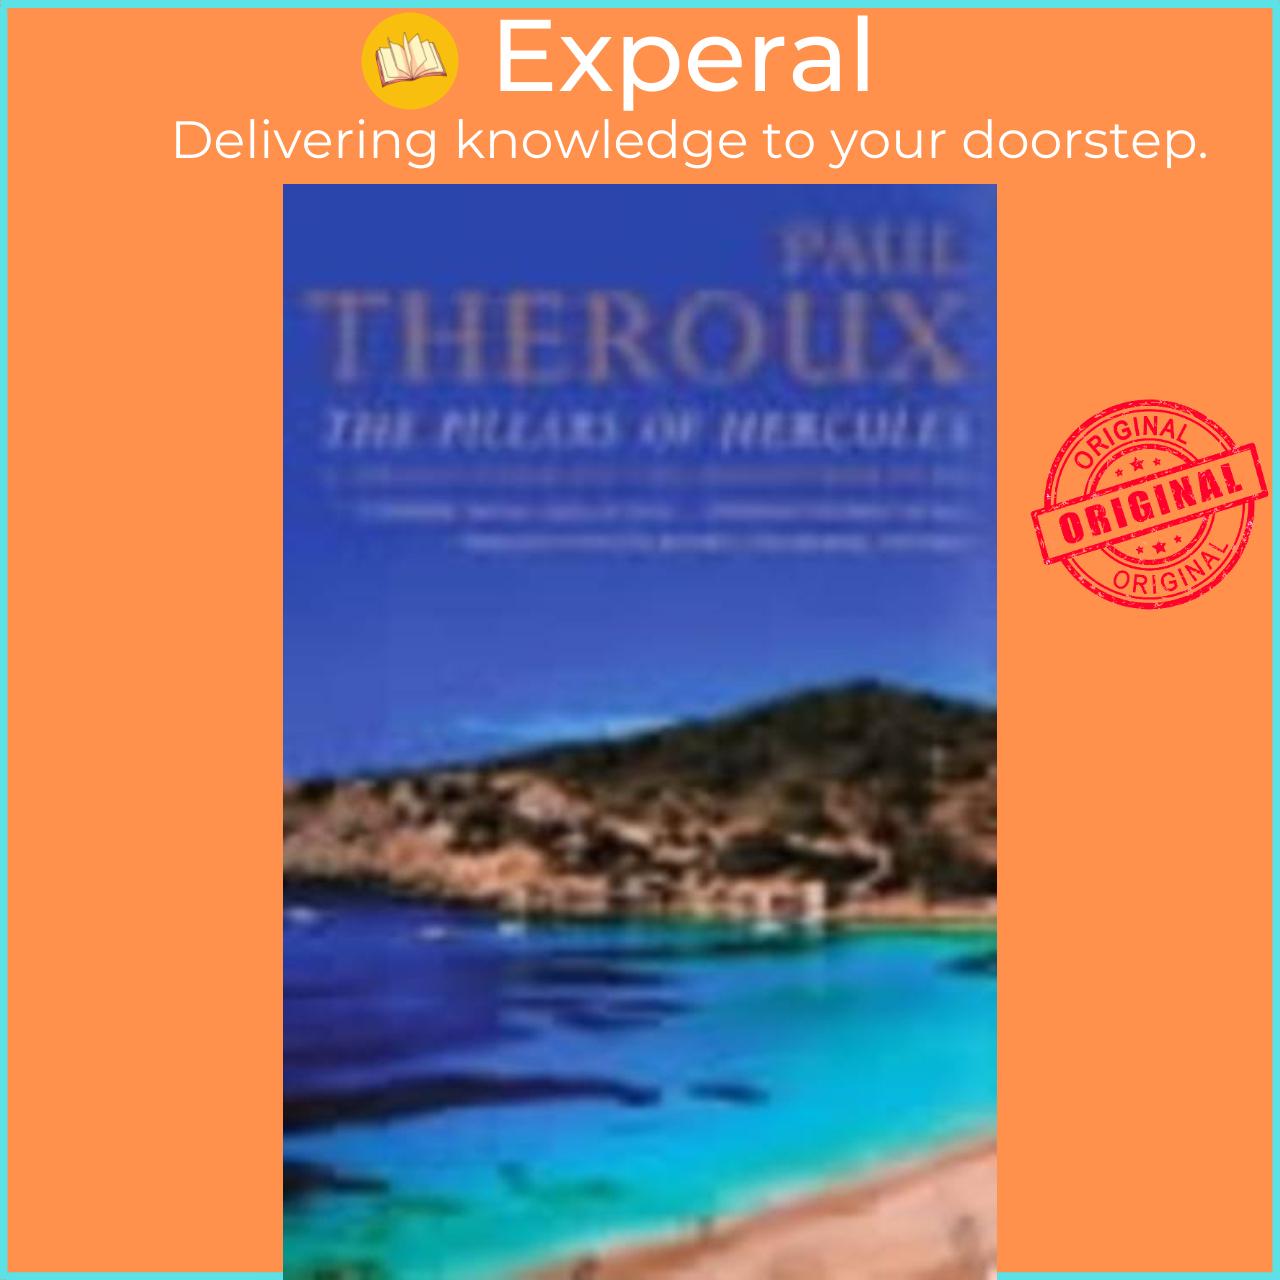 Sách - The Pillars of Hercules - A Grand Tour of the Mediterranean by Paul Theroux (UK edition, paperback)